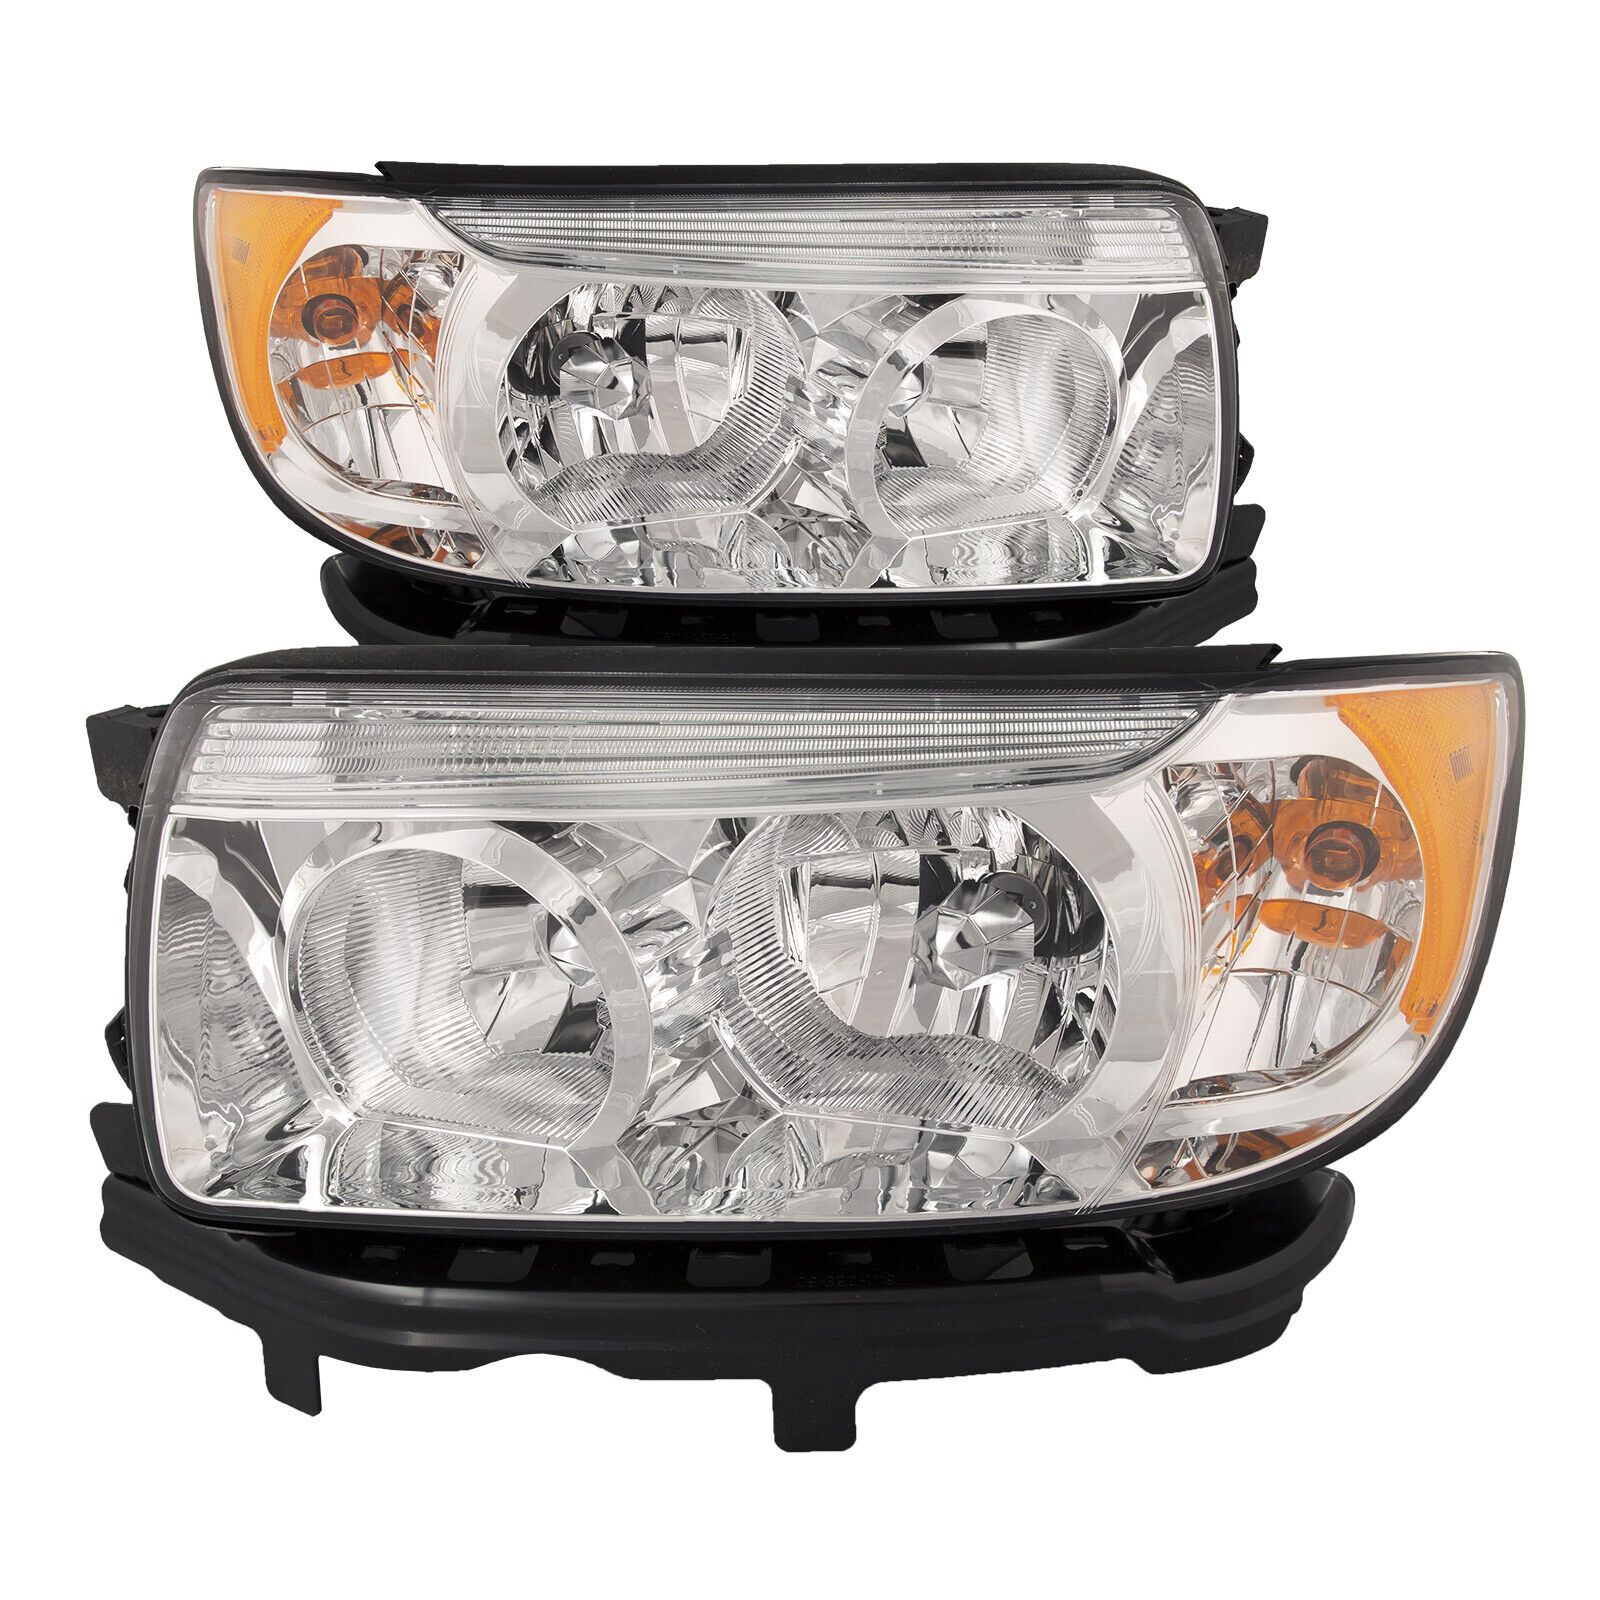 Headlights Pair Fits 06-2008 Subaru Forester 07-2008 Forester